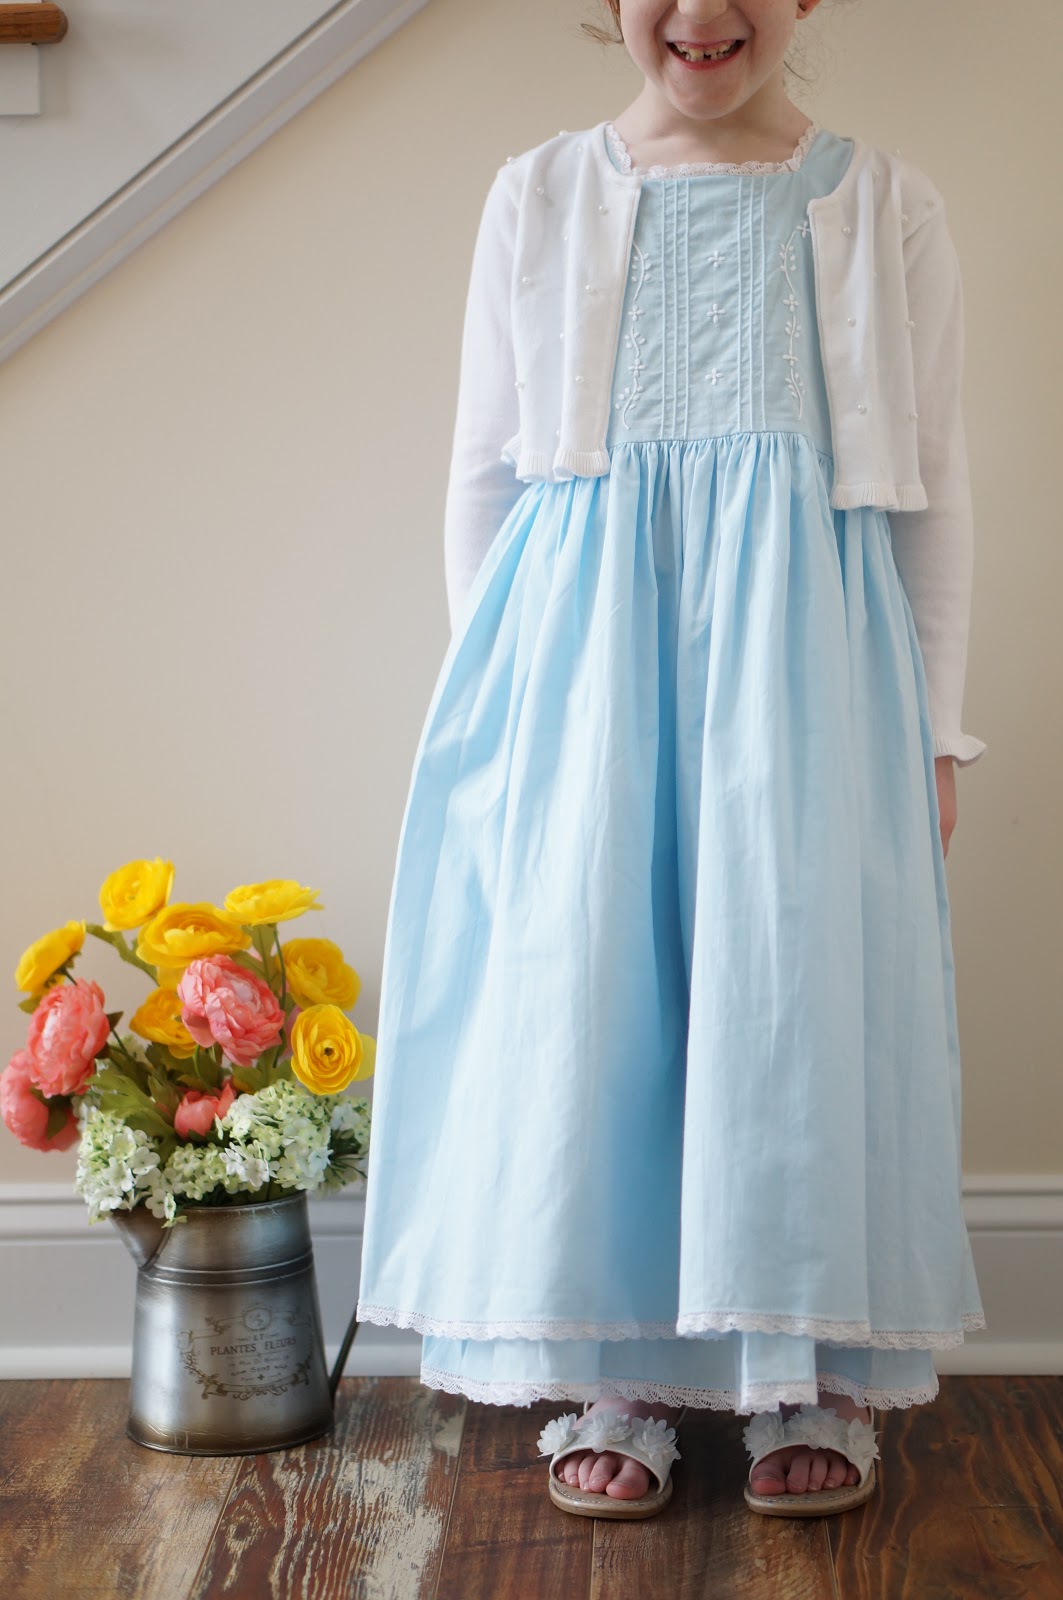 Popular North Carolina style blogger shares the Cape Cod dress from Strasburg Children. Read more here!